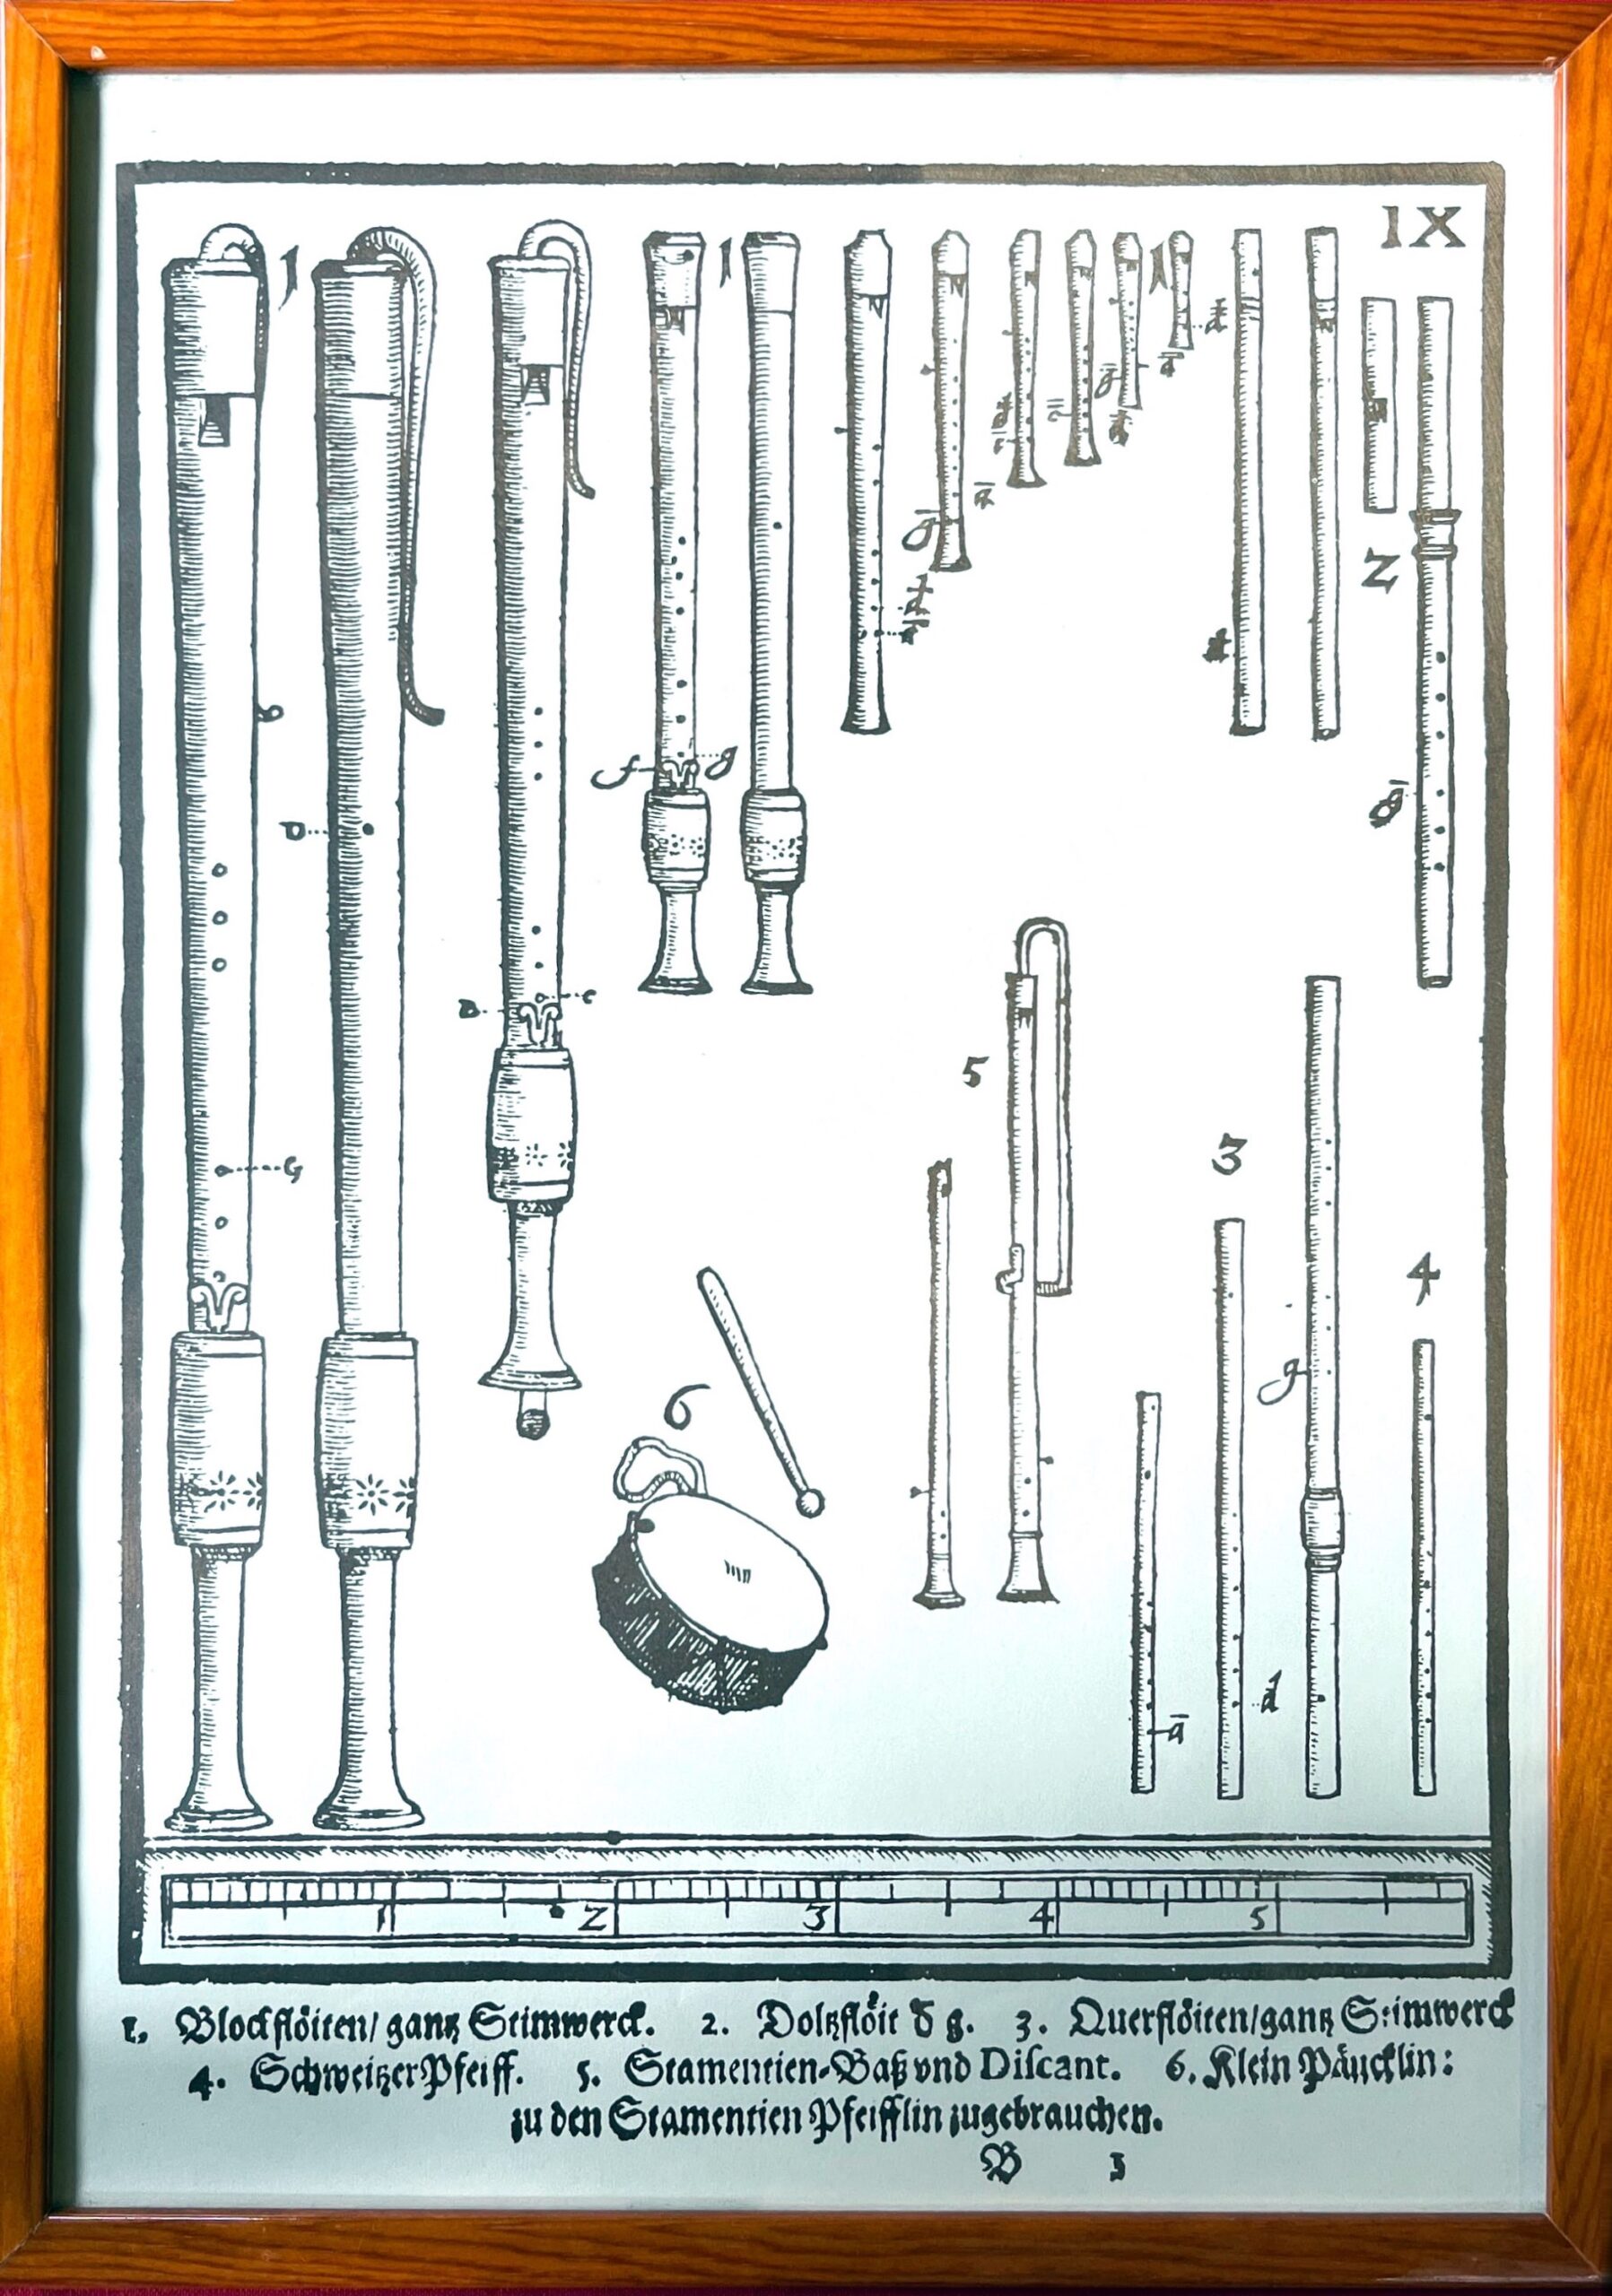 Print of woodwind instruments, based on an original illustration from 'Syntagma Musicum' (1614), a guide to seventeenth-century music performance by Michael Praetorius.